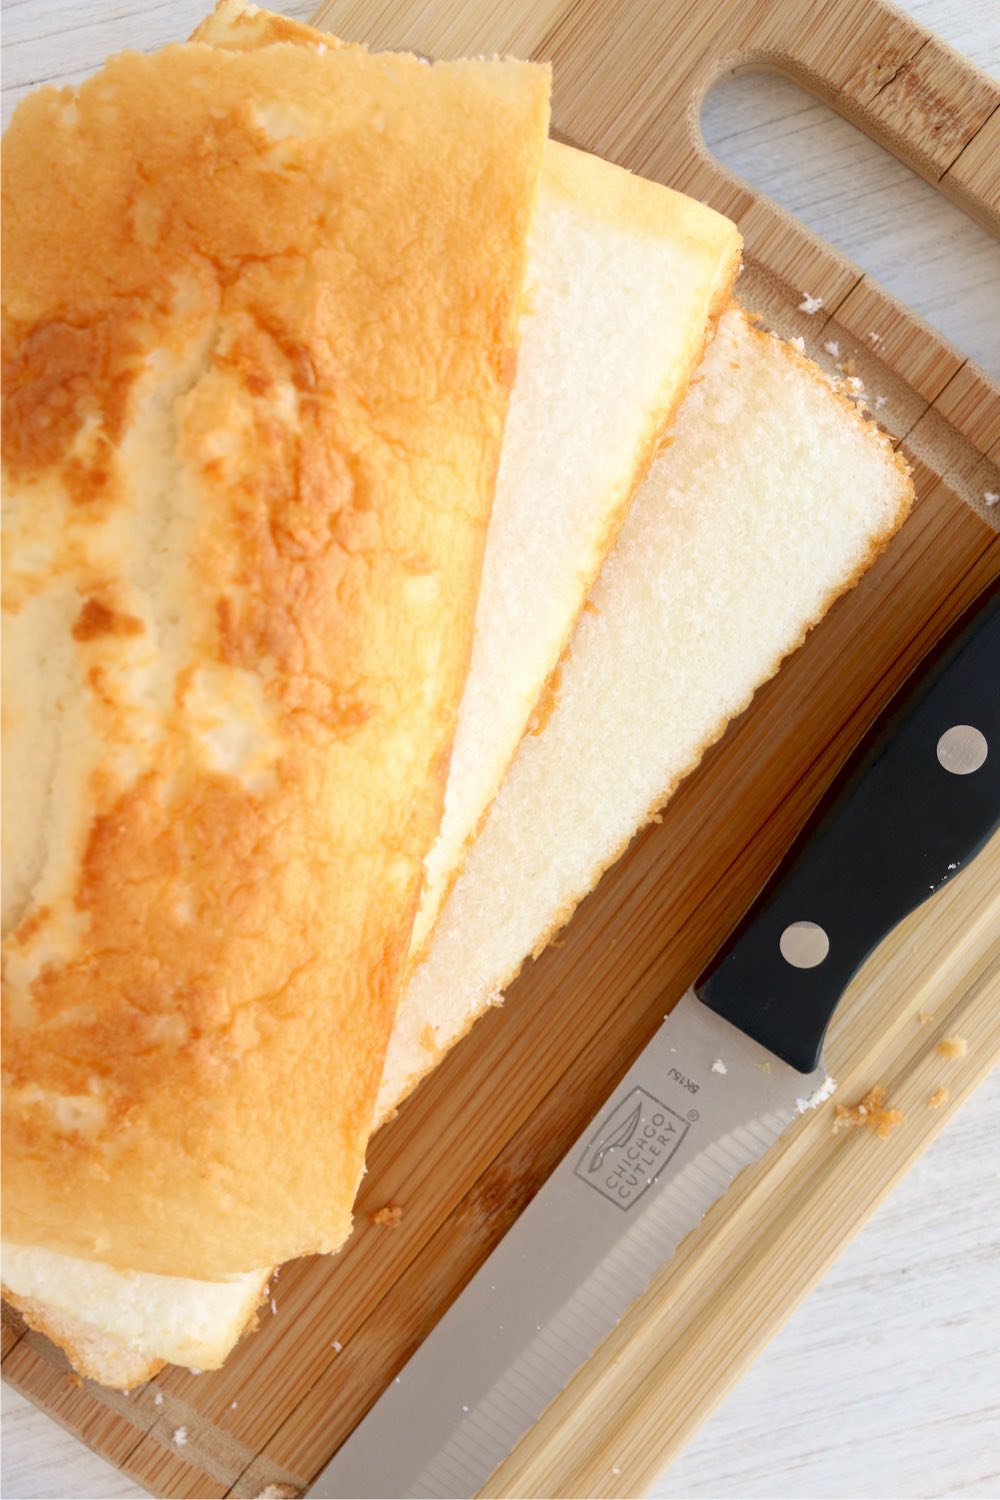 sliced layers of pound cake on cutting board with knife